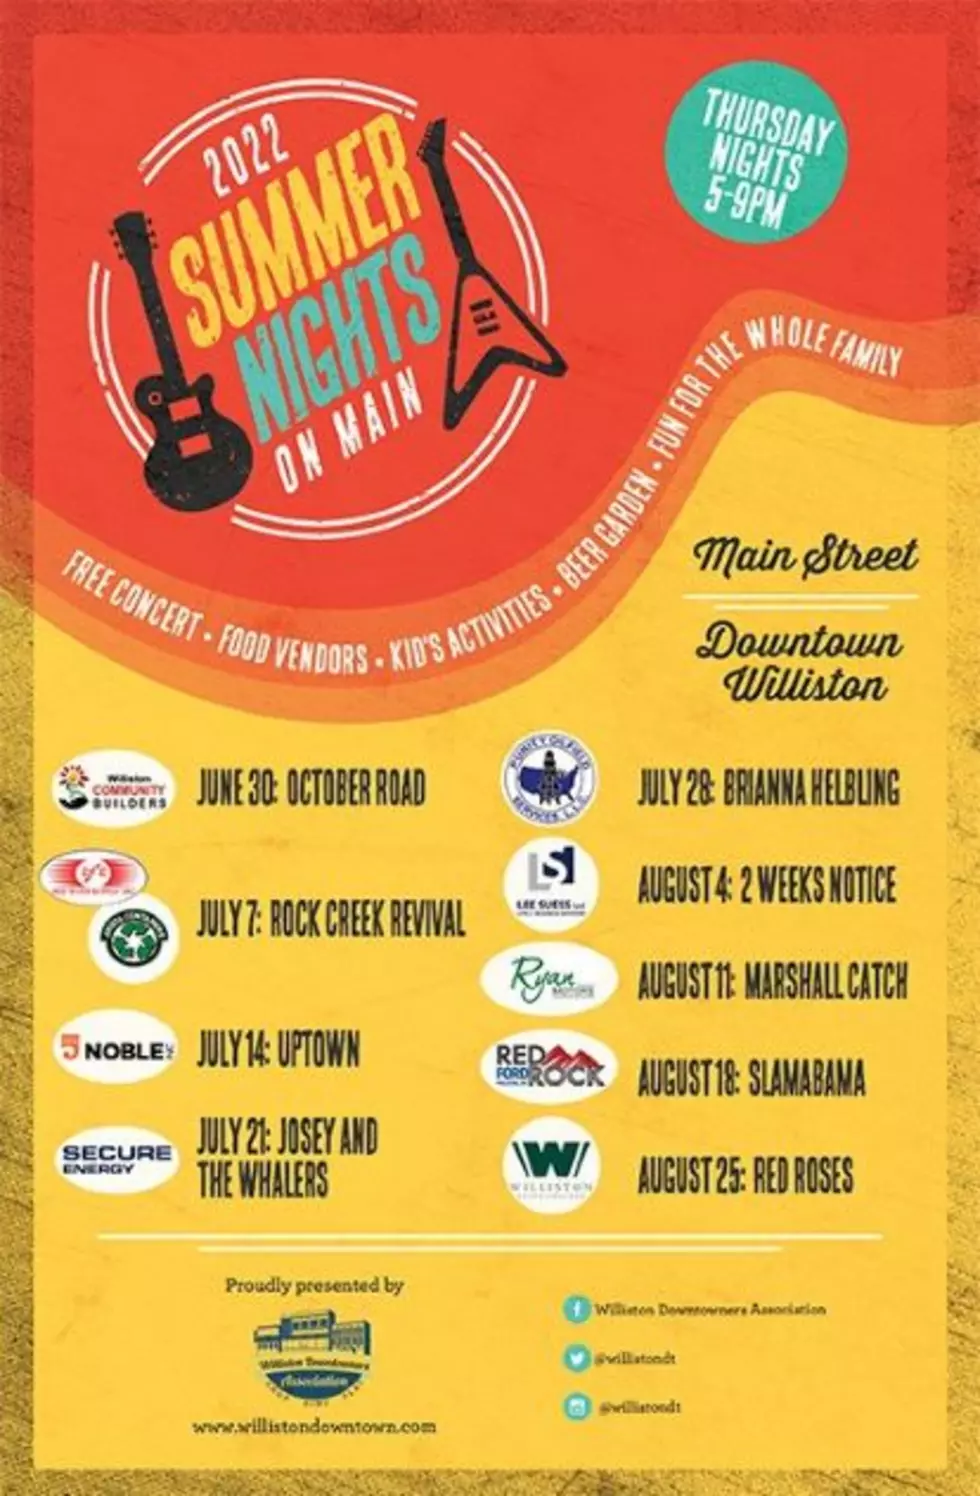 Williston’s Weekly Street Party, Summer Nights on Main, is Back!